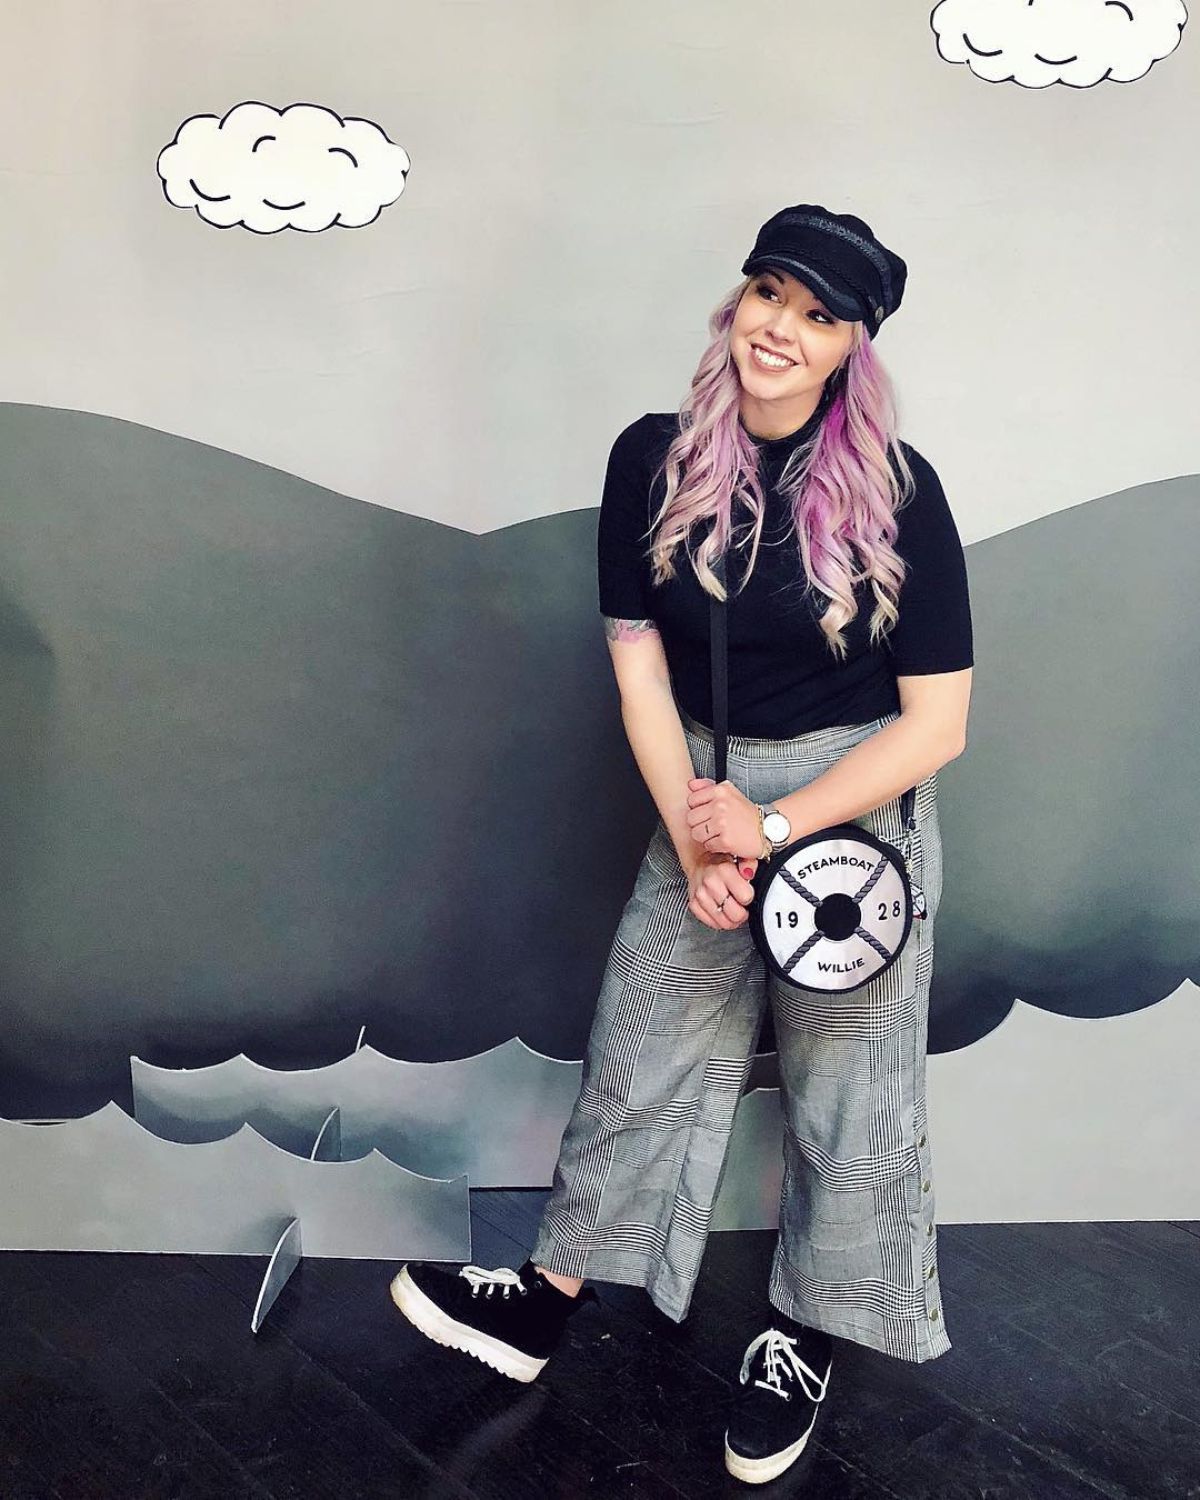 Steamboat Willie Disneybound With Pants